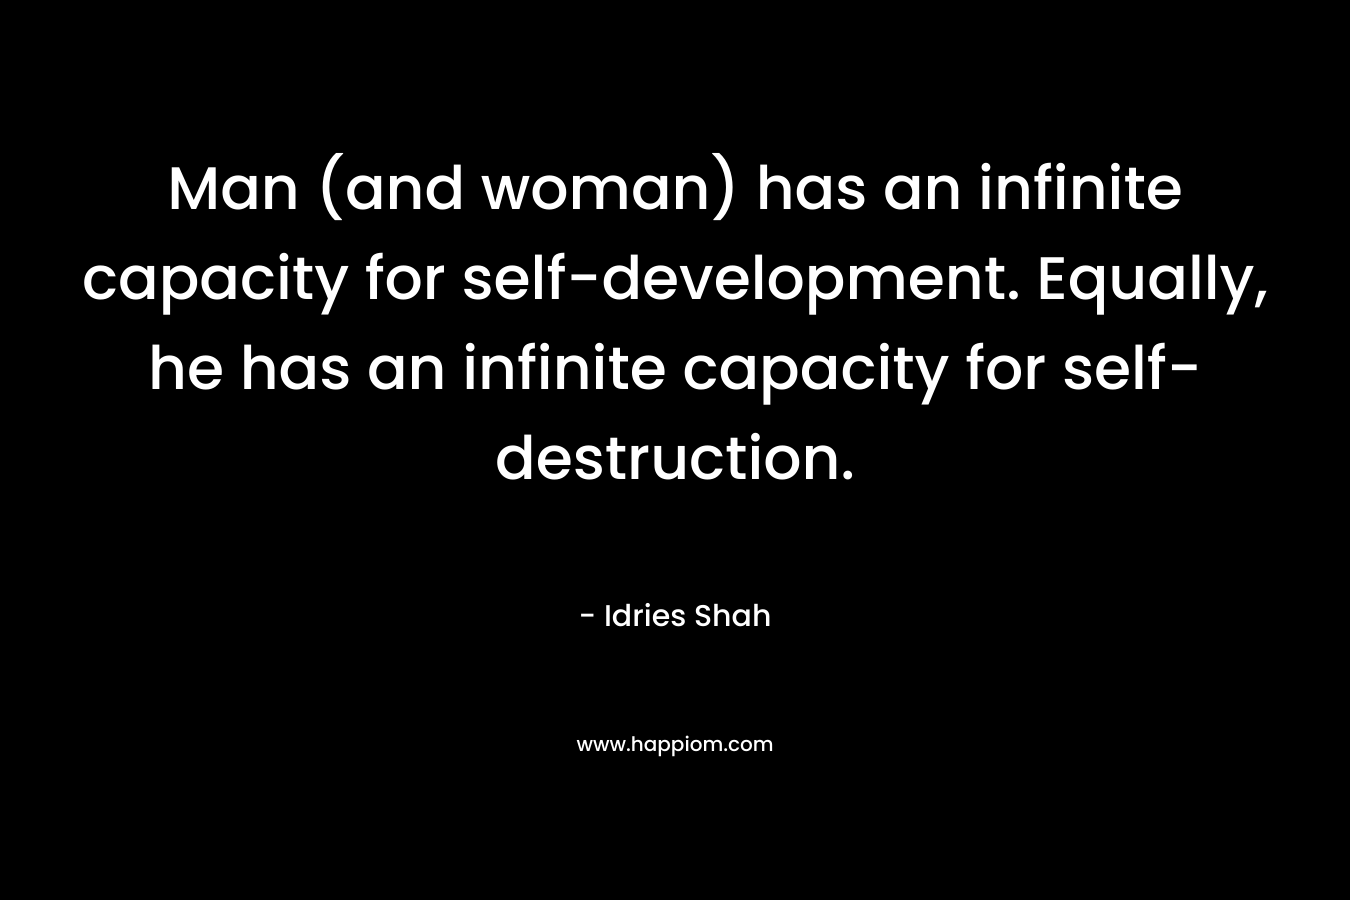 Man (and woman) has an infinite capacity for self-development. Equally, he has an infinite capacity for self-destruction.